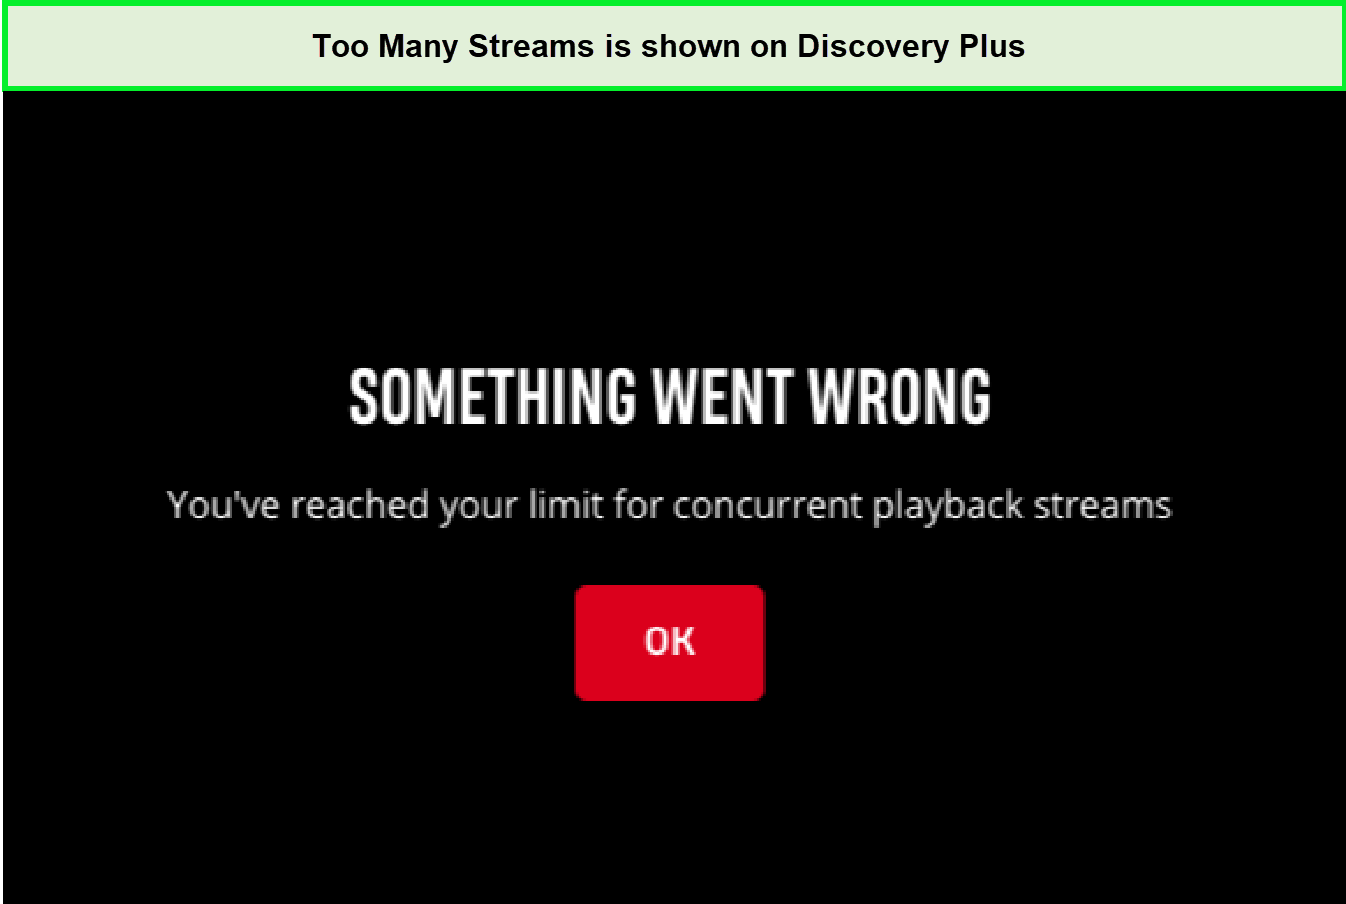 discovery-plus-too-many-streams-error-in-Hong Kong